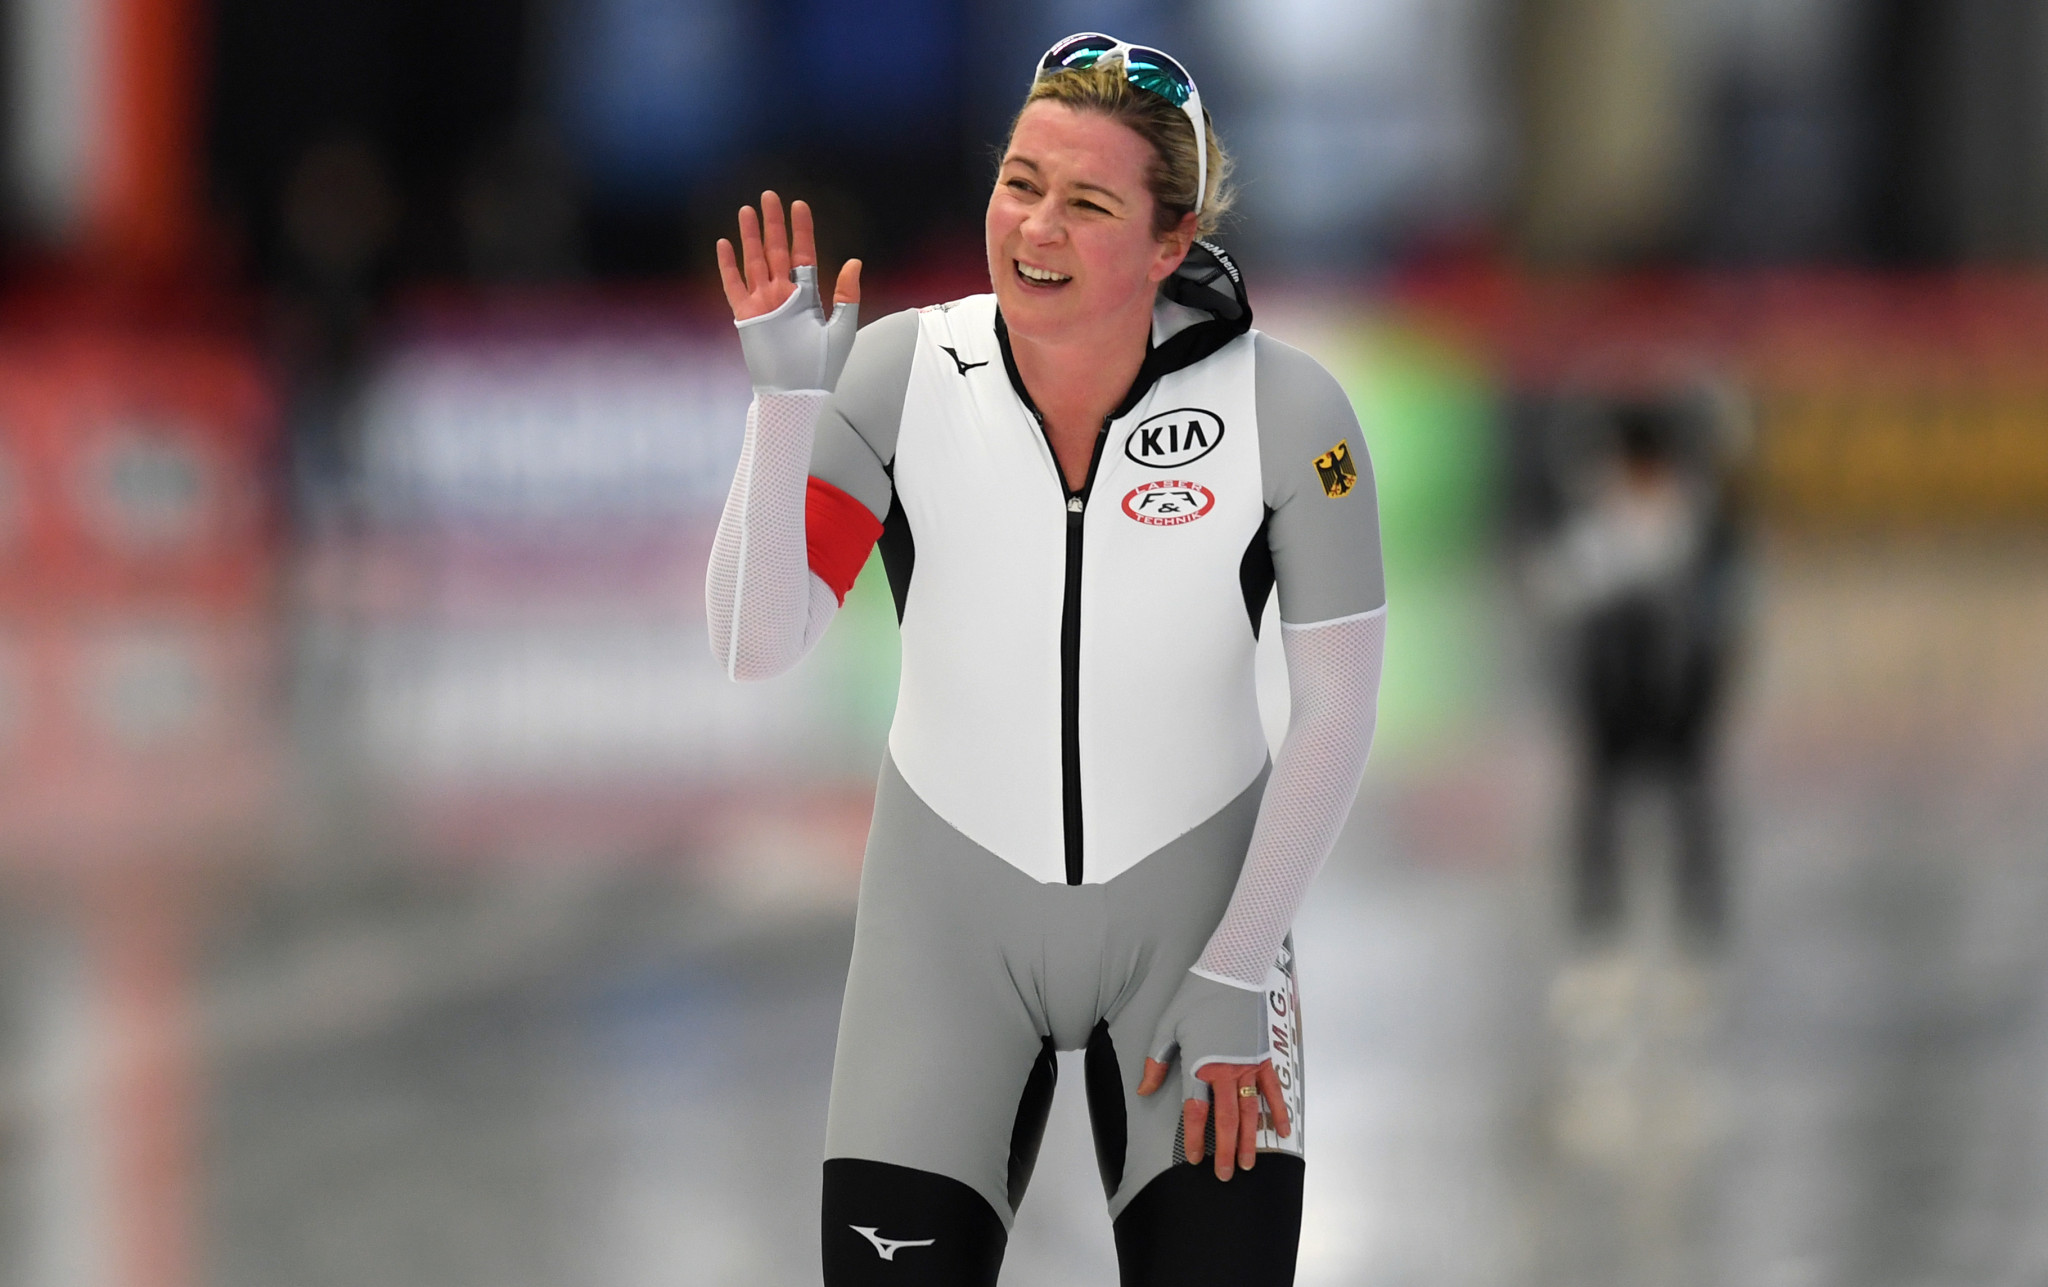 Claudia Pechstein has qualified for her eighth Olympics ©Getty Images